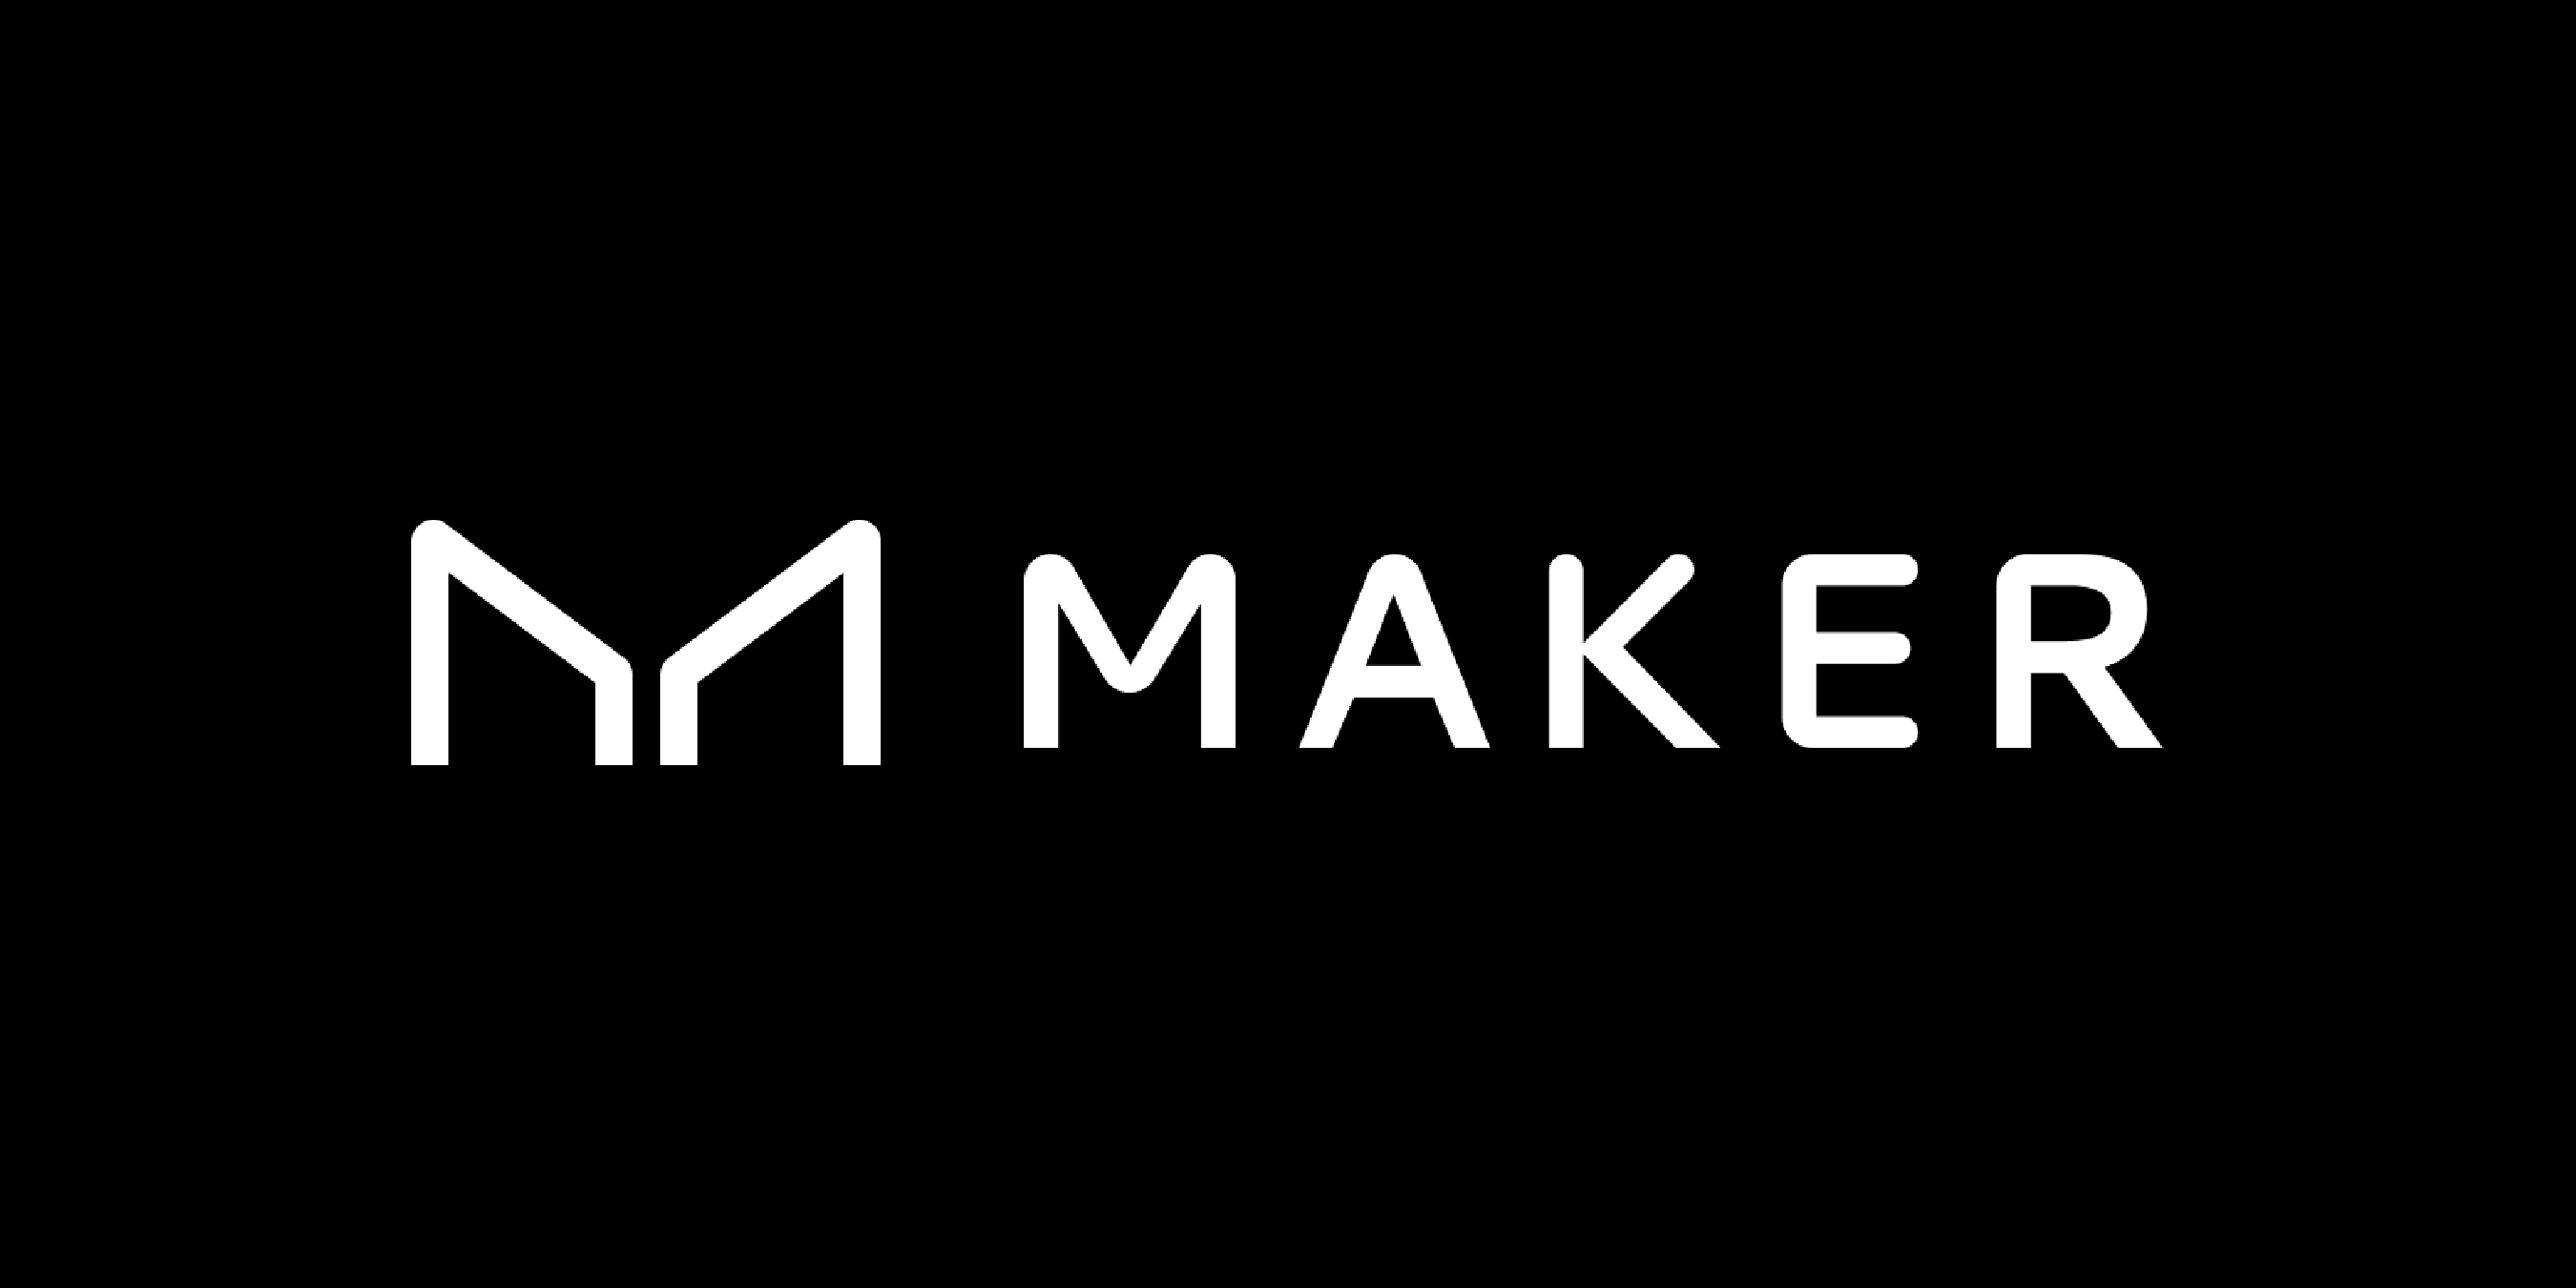 MakerDAO Targets $600M DAI Investment in USDe, sUSDe